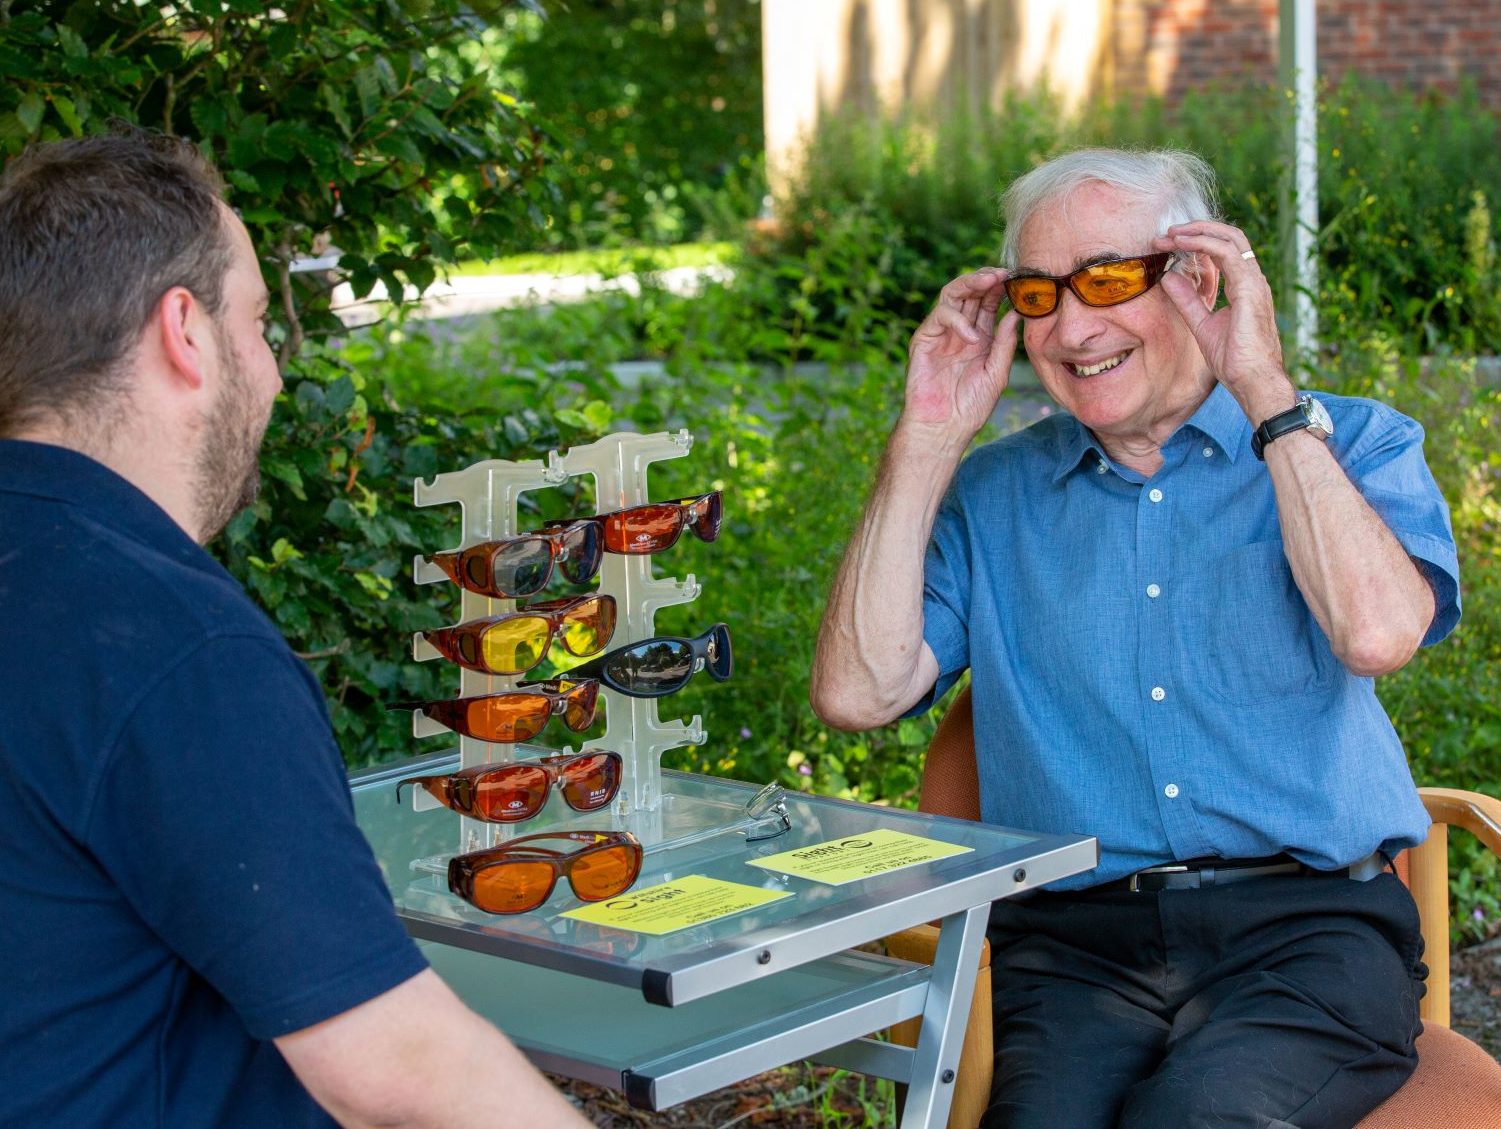 A Community Sight Loss Advisor is sitting outside with a gentleman who is trying out some eyeshields.